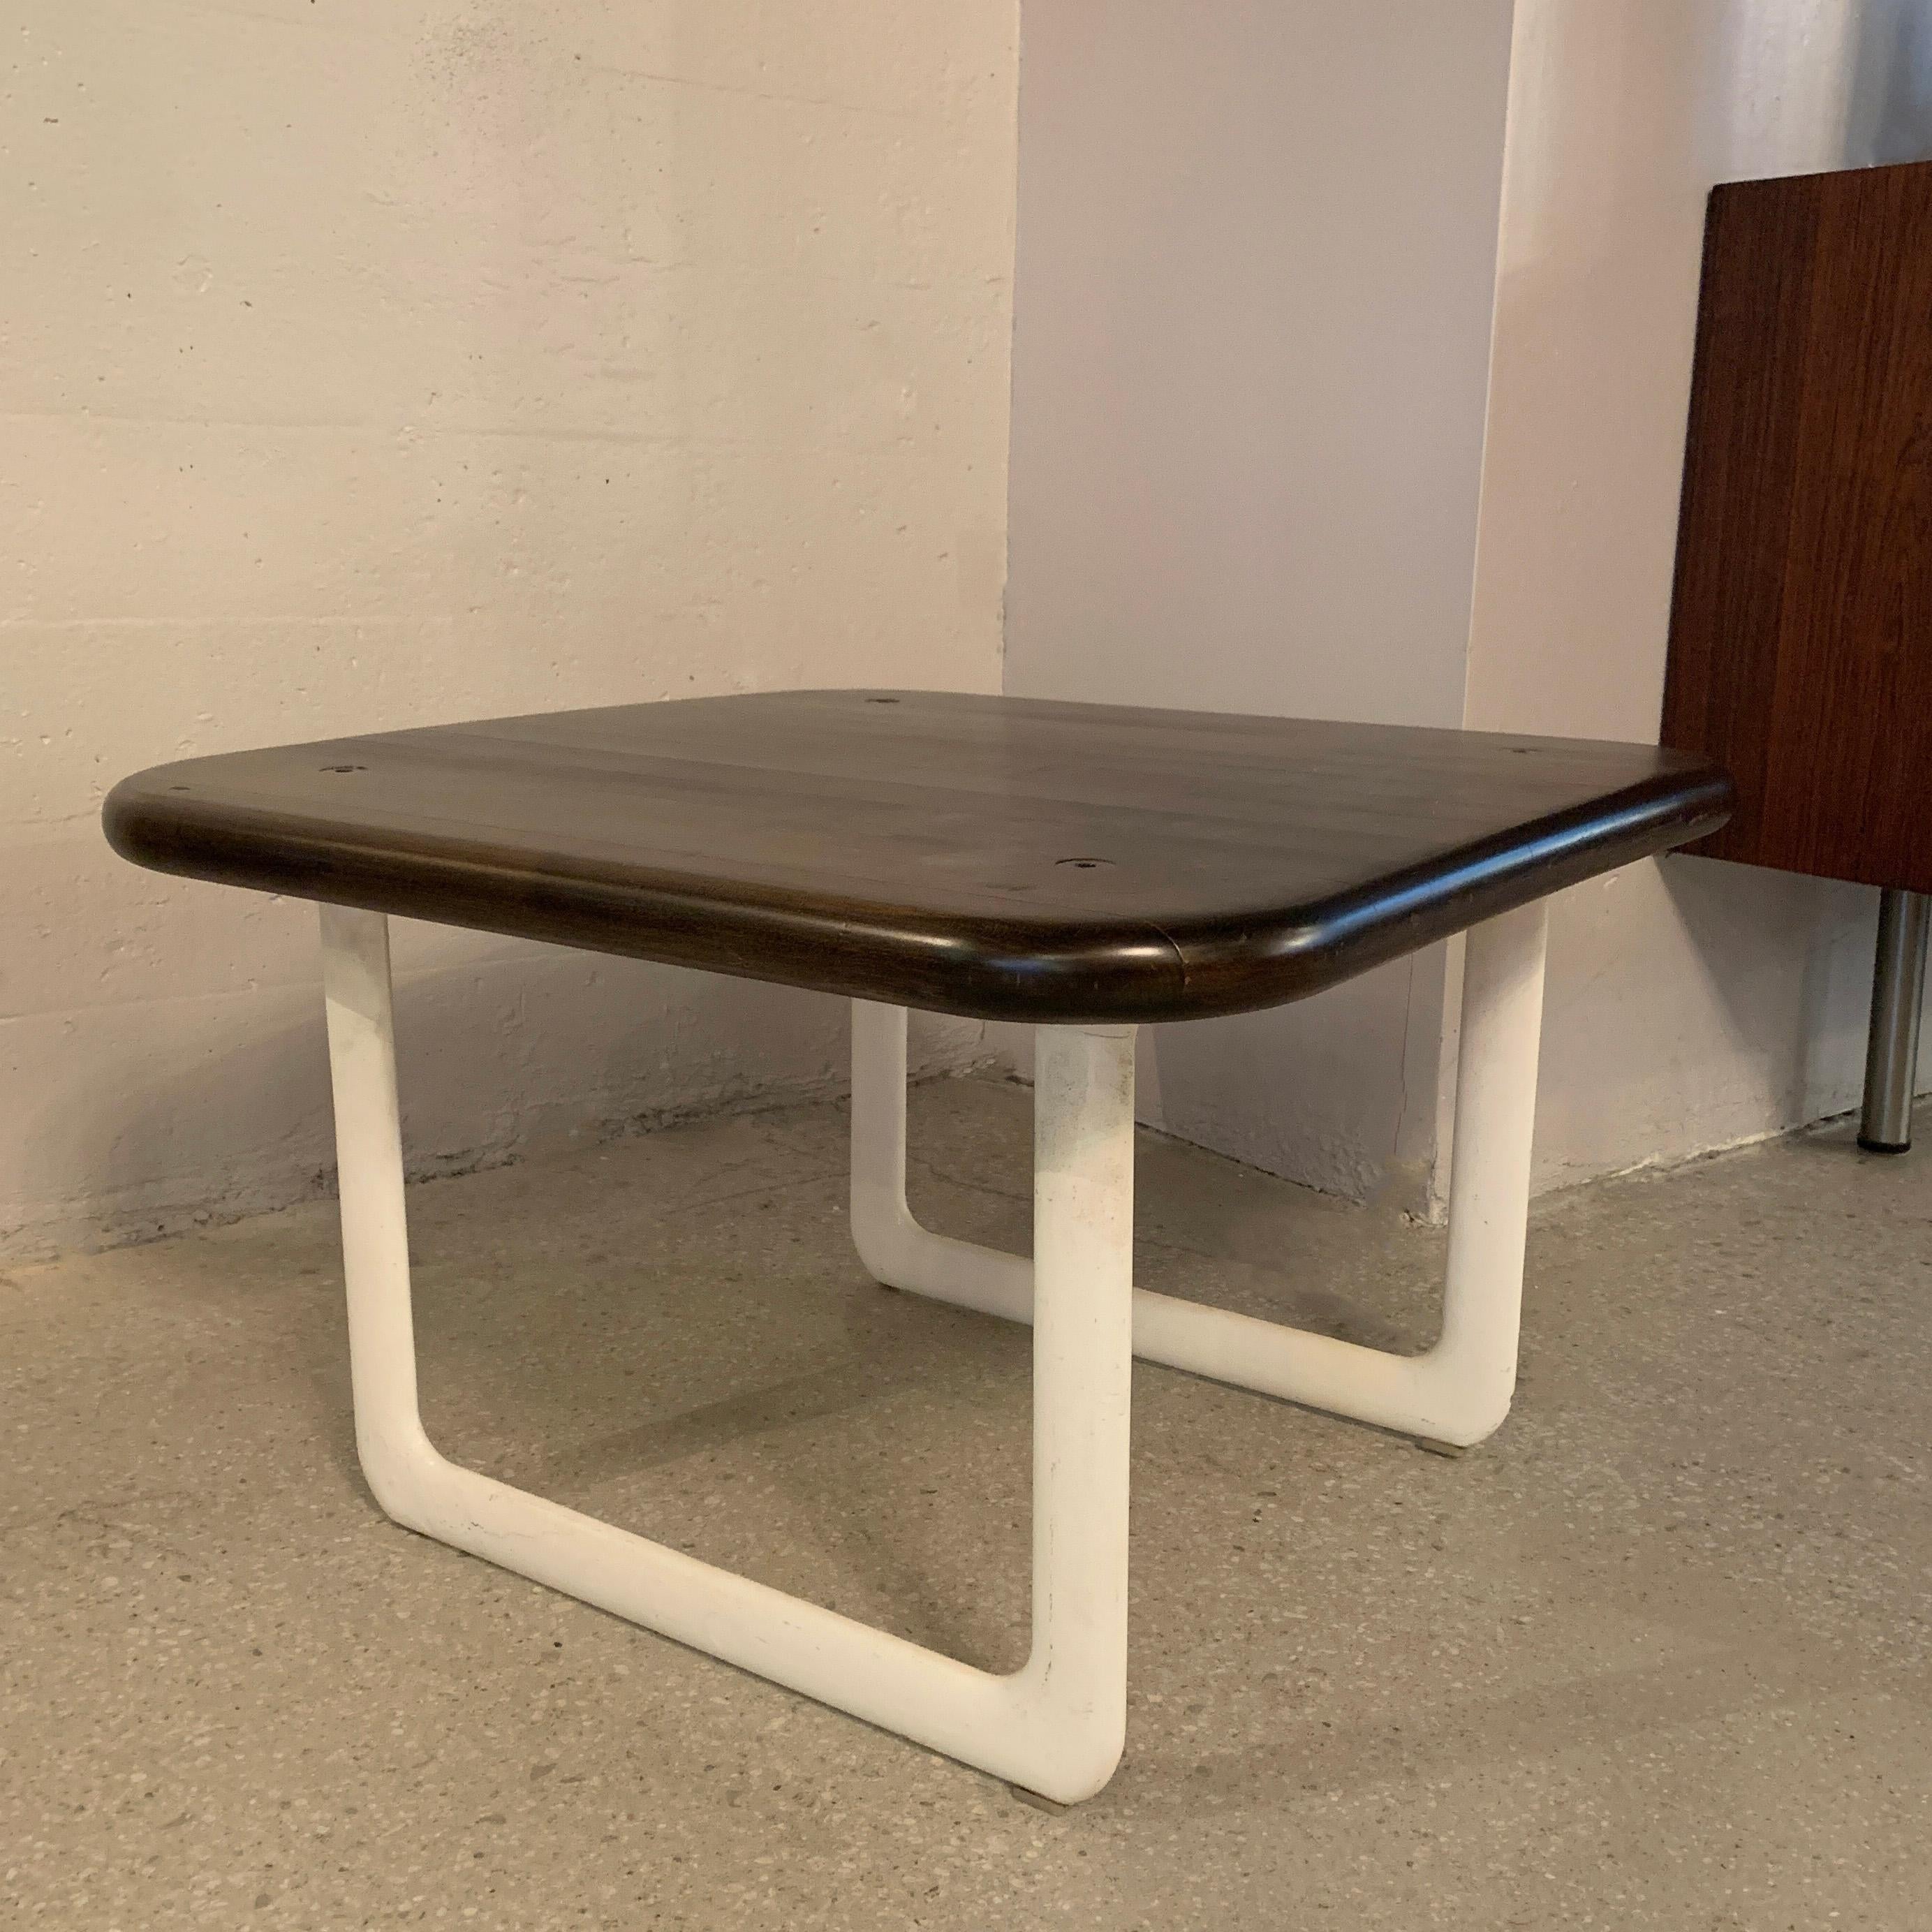 Mid-Century Modern, coffee table by Bruce Hannah & Andrew Morrison for Knoll features white powder coated, cast aluminum sleigh legs with an ebonized maple block top.